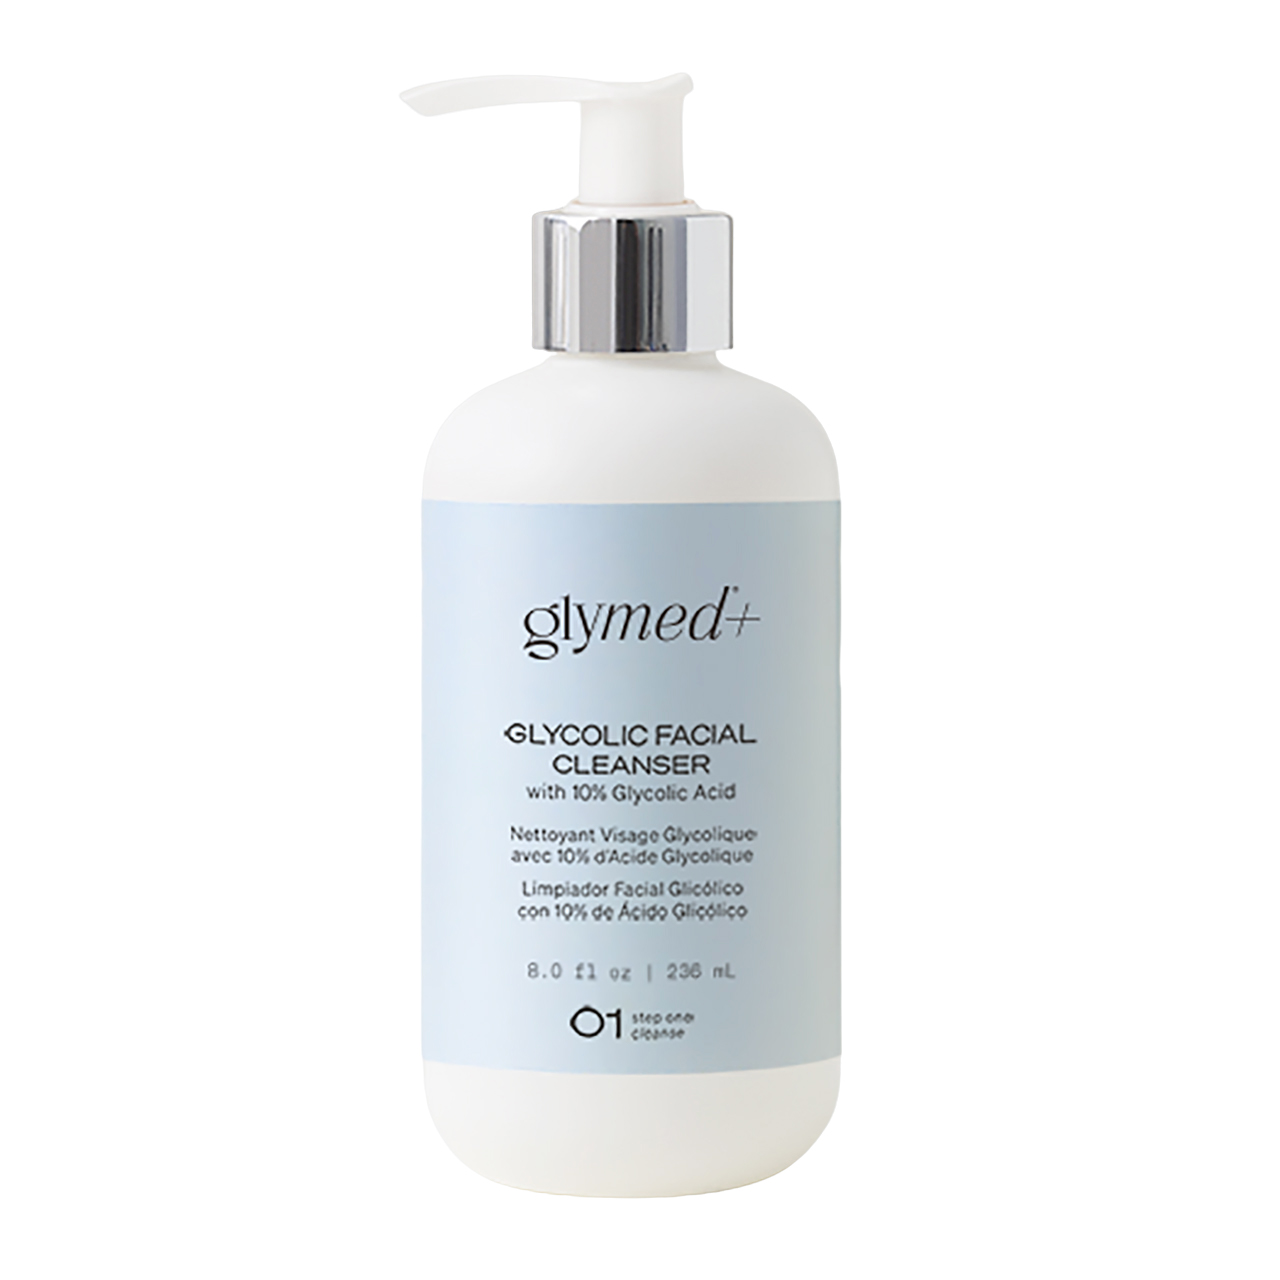 GlyMed Plus Glycolic Facial Cleanser - 8 oz Questions & Answers